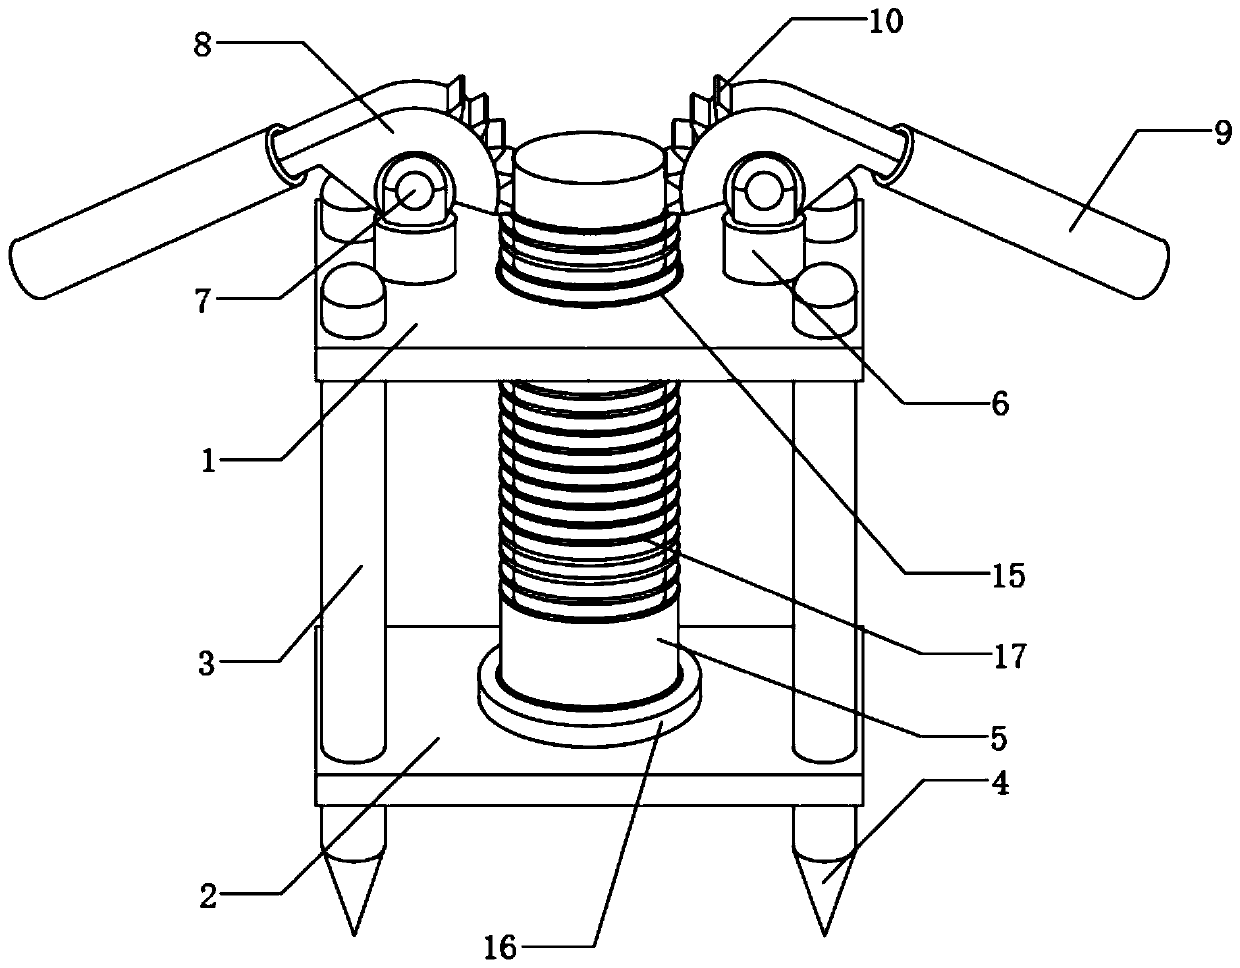 Ground anchor detachment device for electrical power engineering